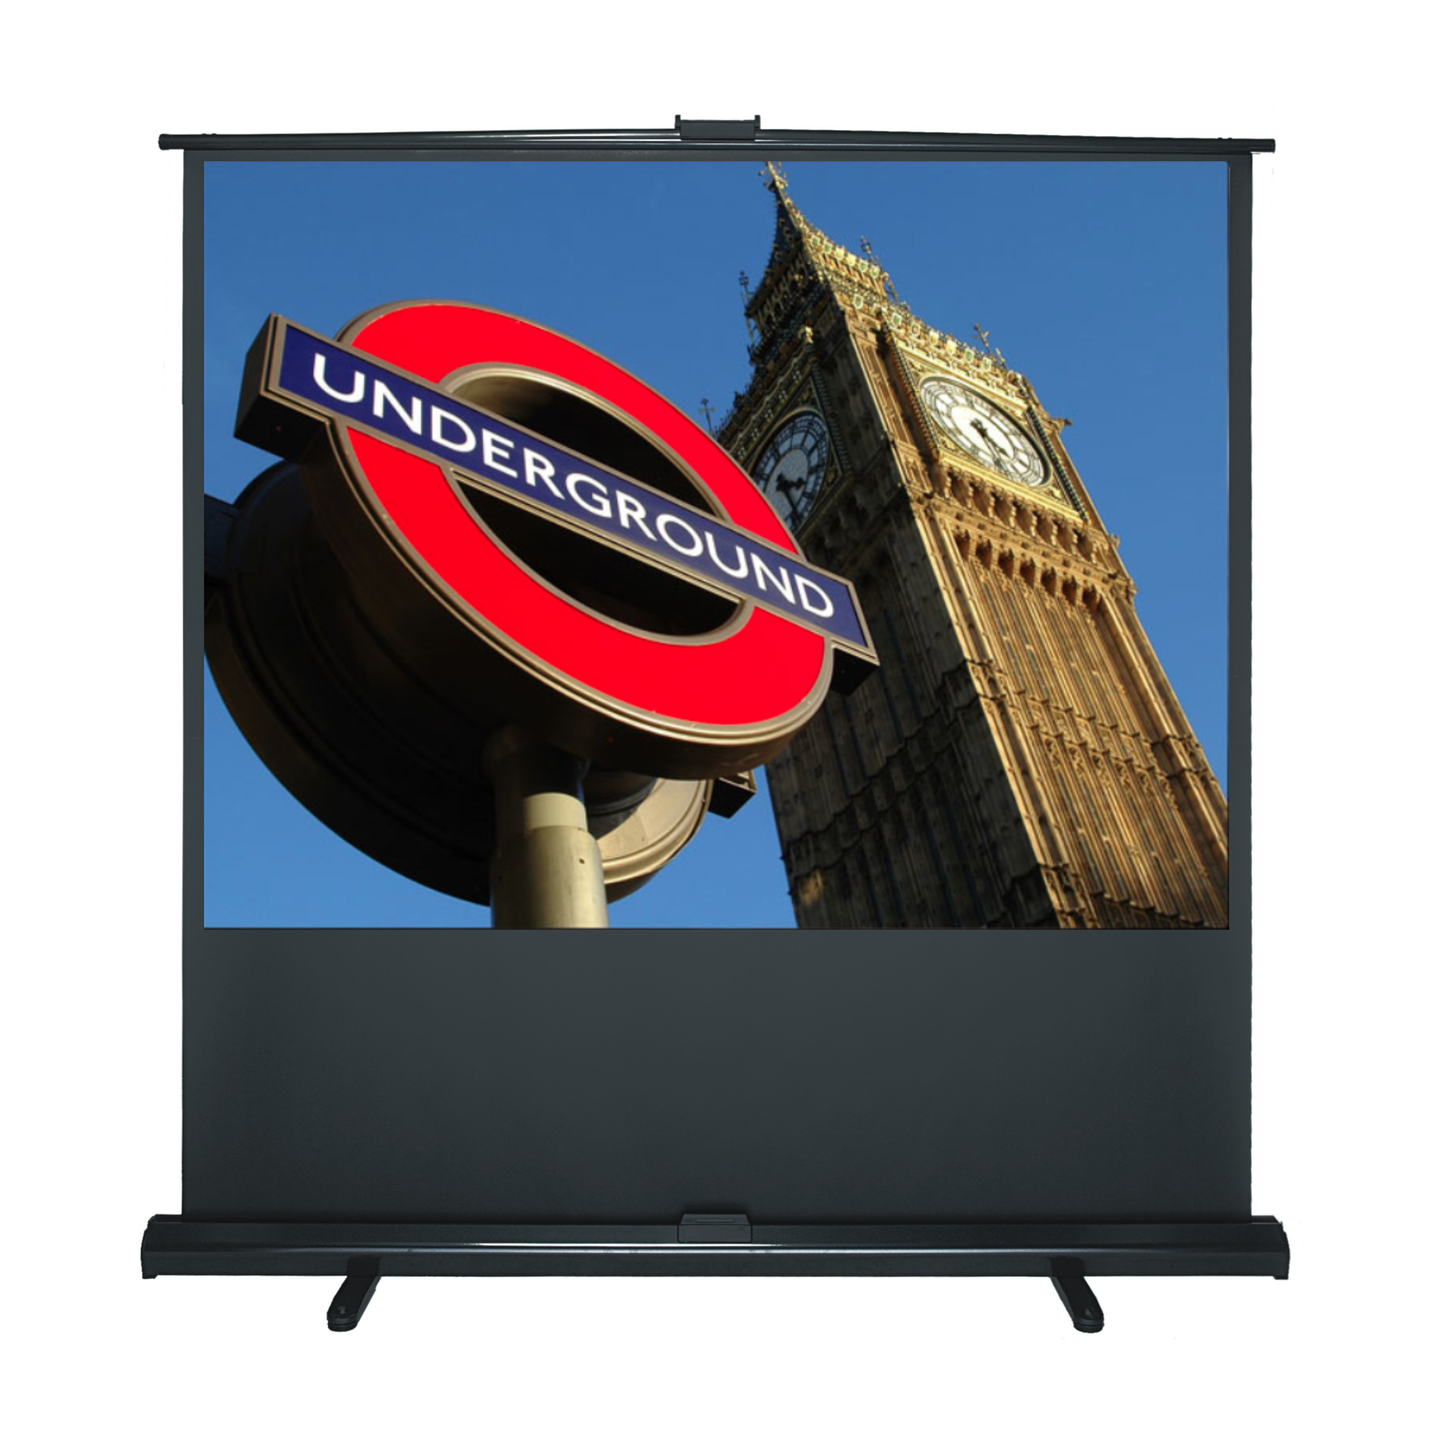 Sapphire Portable Pull-up Screen 4:3 Format Viewing Area 1220 x 900 Approx Case Dimensions L 1380mm x H 83mm x D 61mm